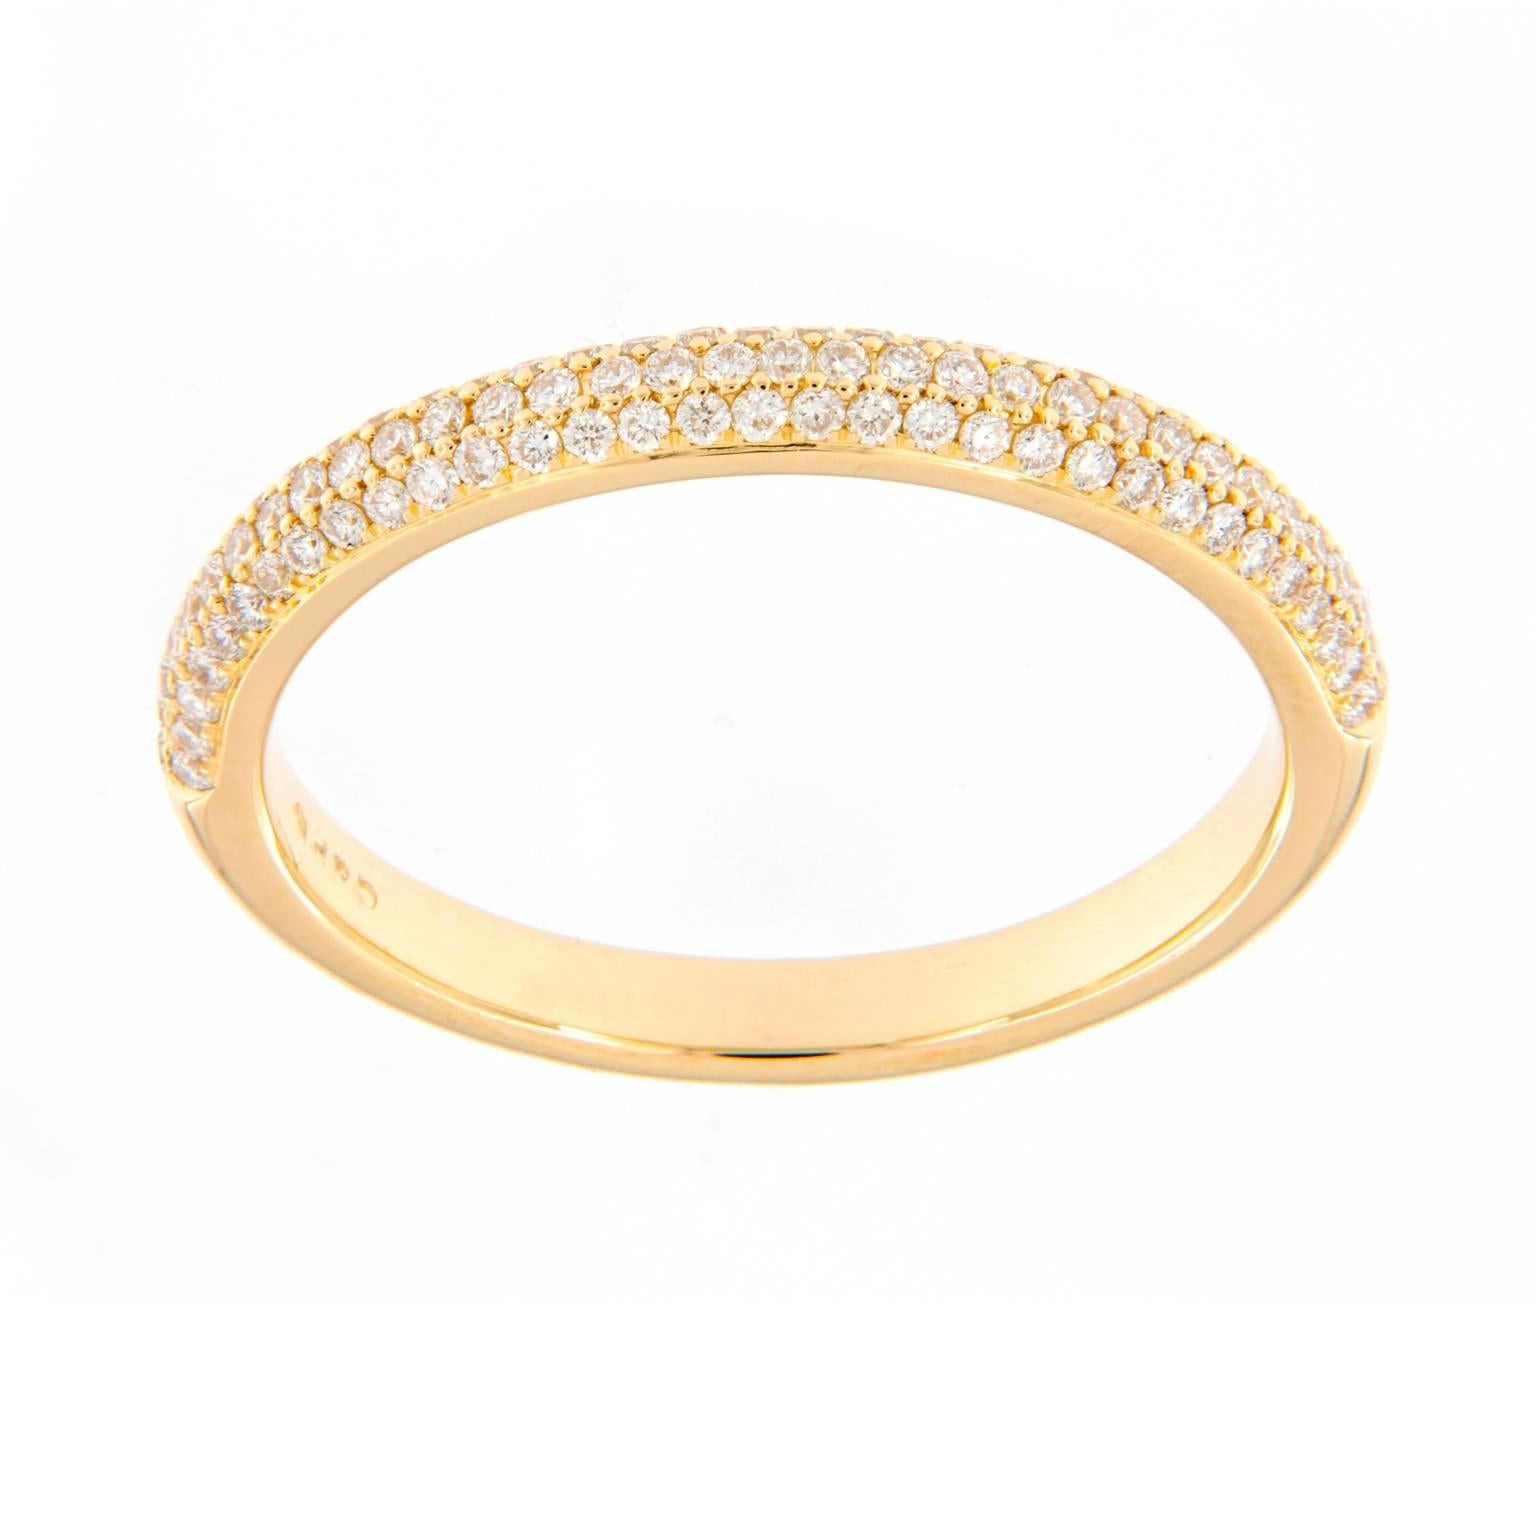 This delicately crafted 18k yelllow gold wedding anniversary band ring features three rows of micropavé set diamonds that weigh a total of 0.58 cttw. Ring size 7. Weighs 3.3 grams.

Diamond 0.58 cttw